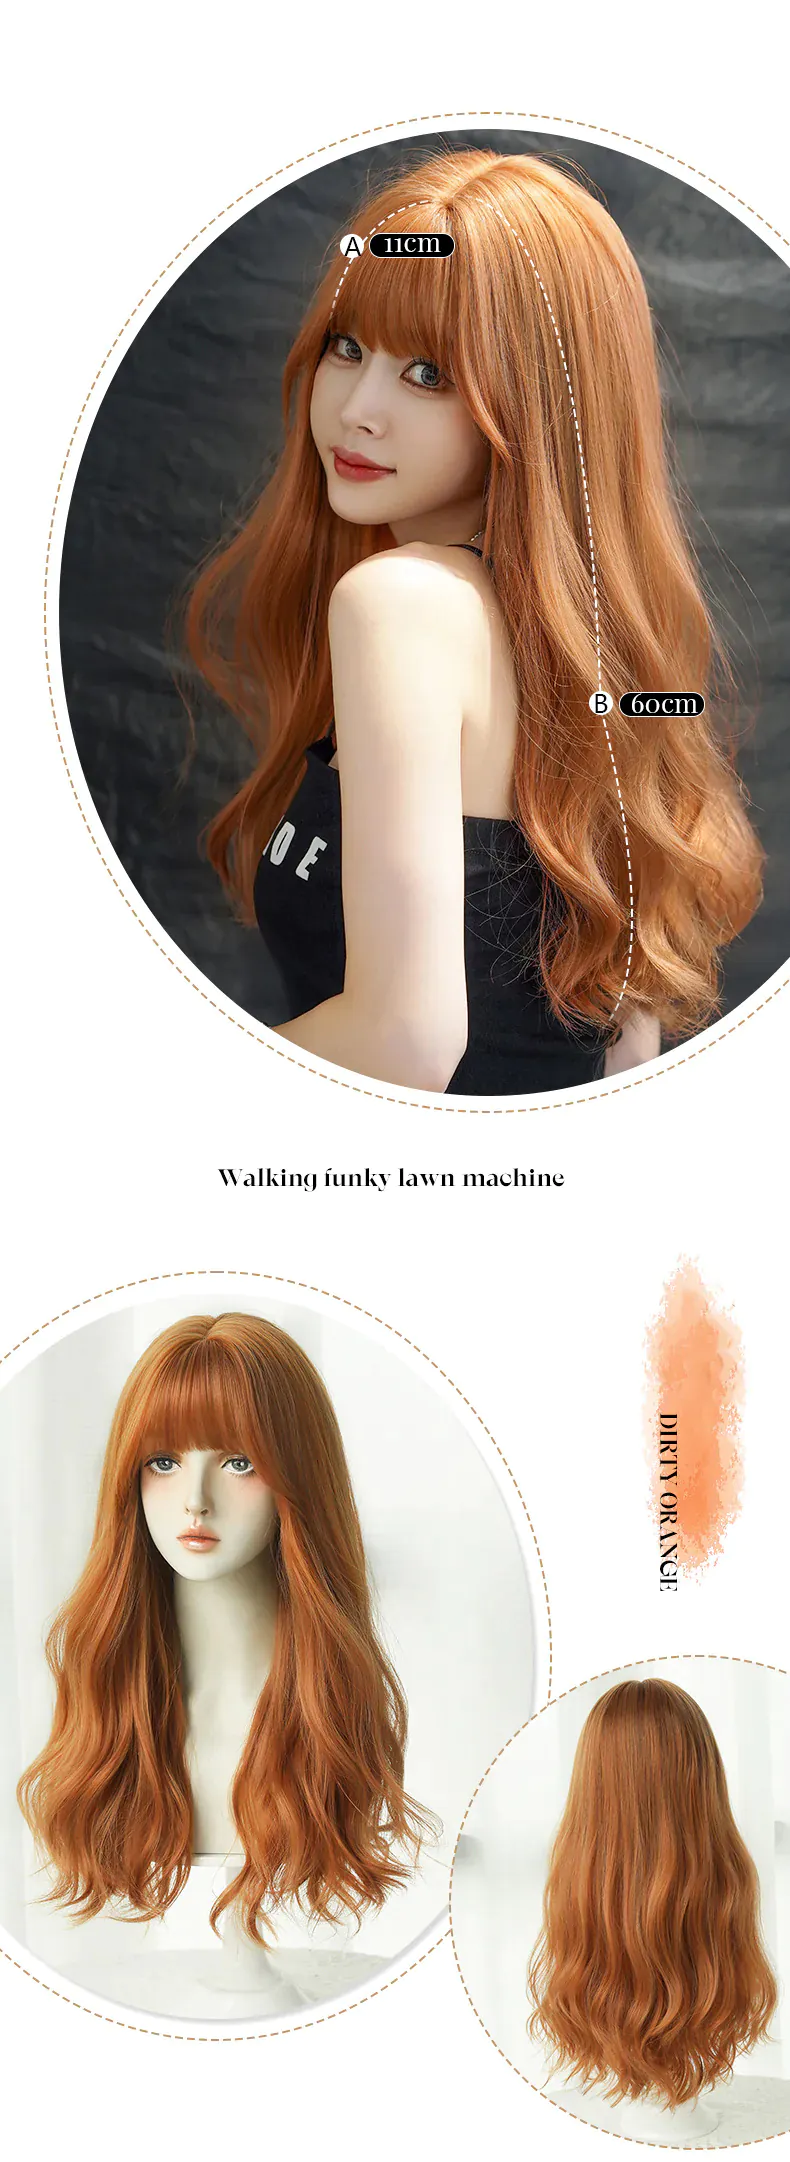 Orange-Synthetic-Hair-Party-Anime-Cosplay-Long-Wavy-Wig-with-Bangs09